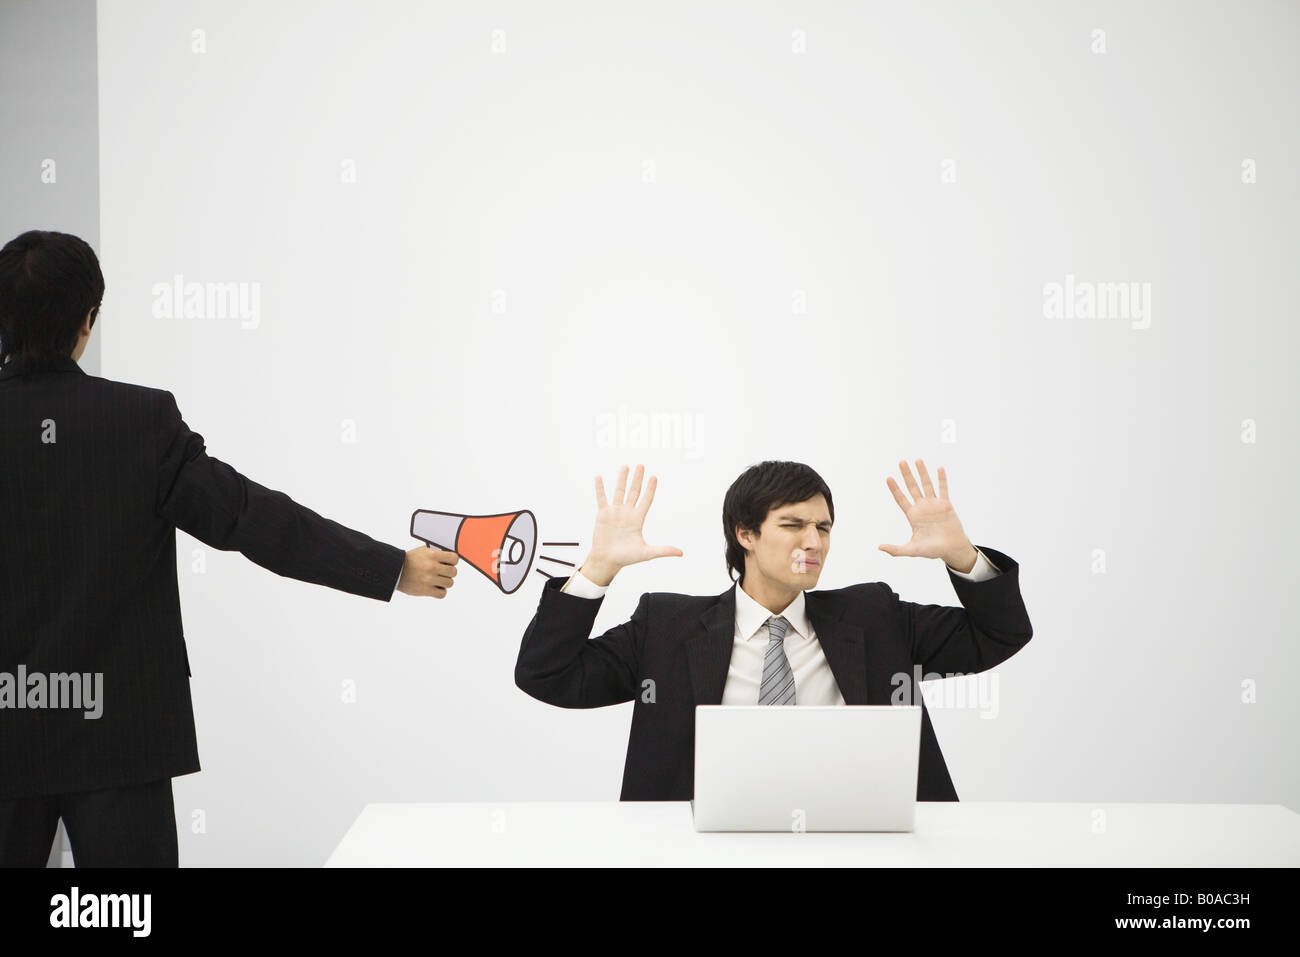 Young professional sitting in front of laptop computer with hands raised, colleague aiming megaphone at him Stock Photo